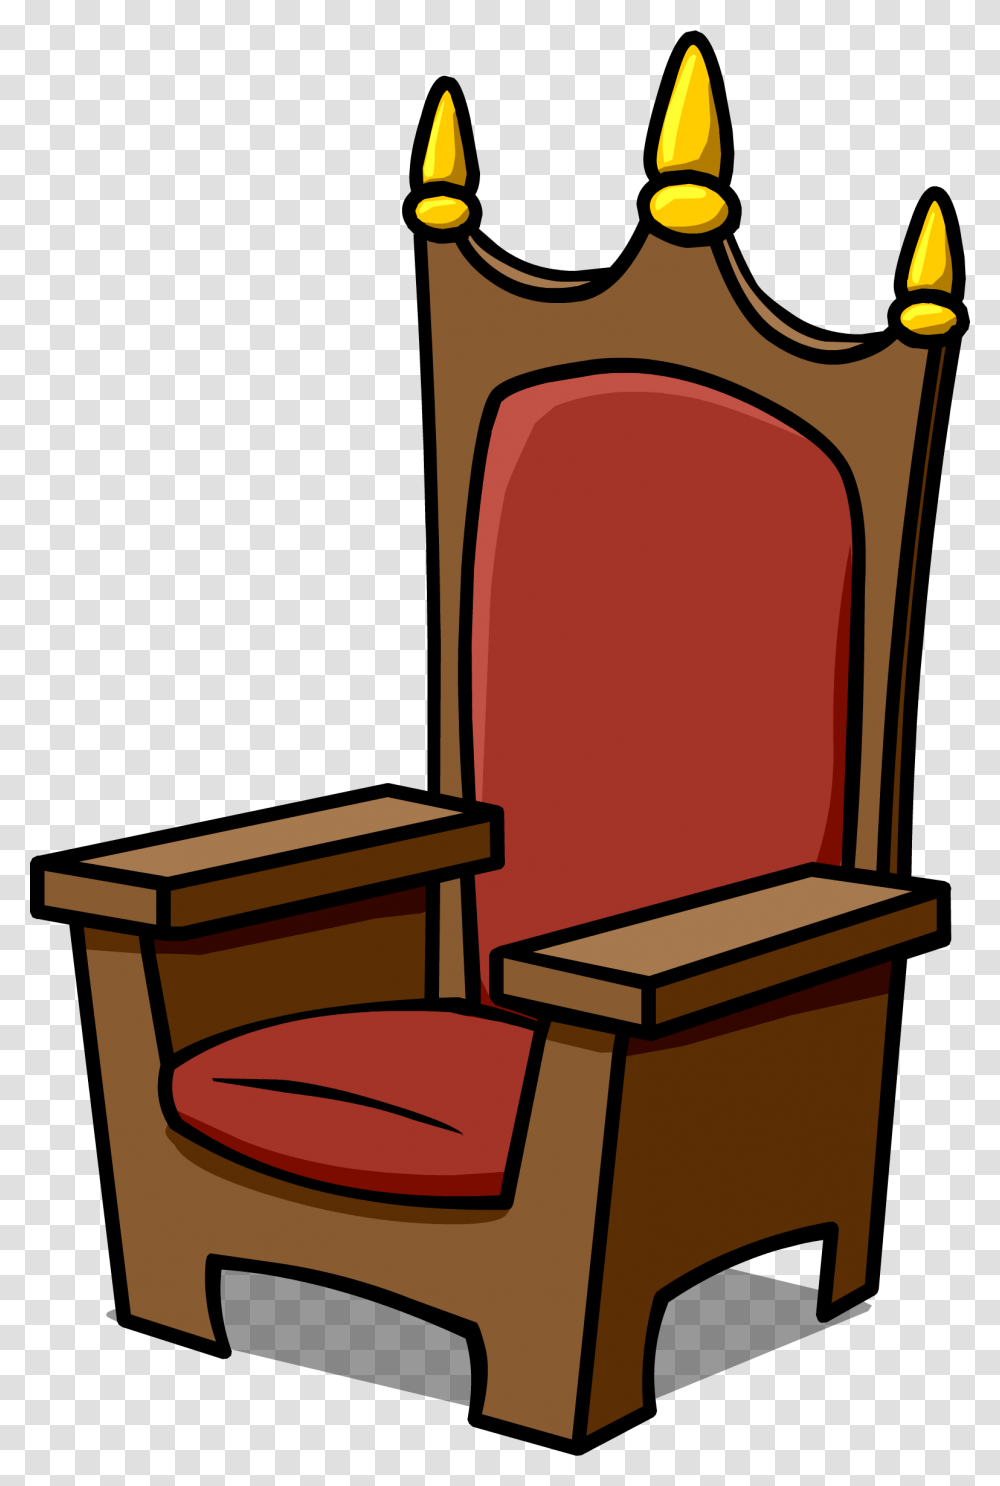 Royal Throne Id 343 Sprite Royal Throne, Furniture, Chair, Couch Transparent Png